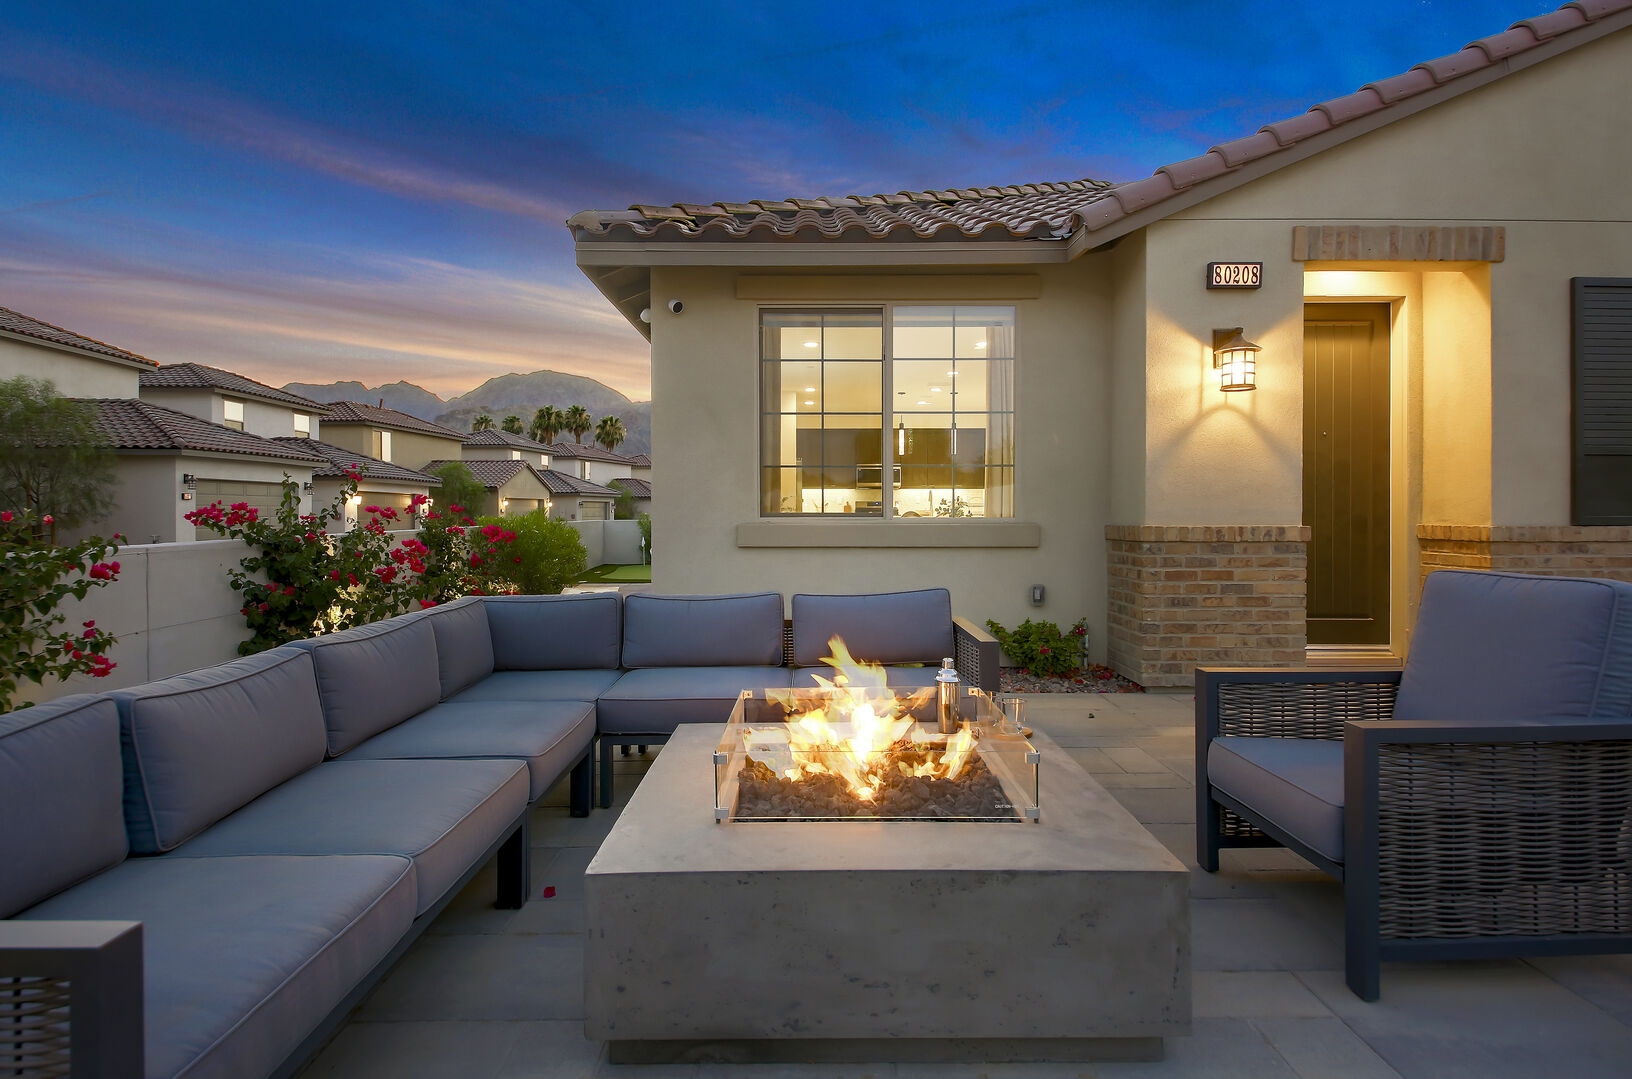 Gather around the natural gas fire pit and seating up to 8 guests.